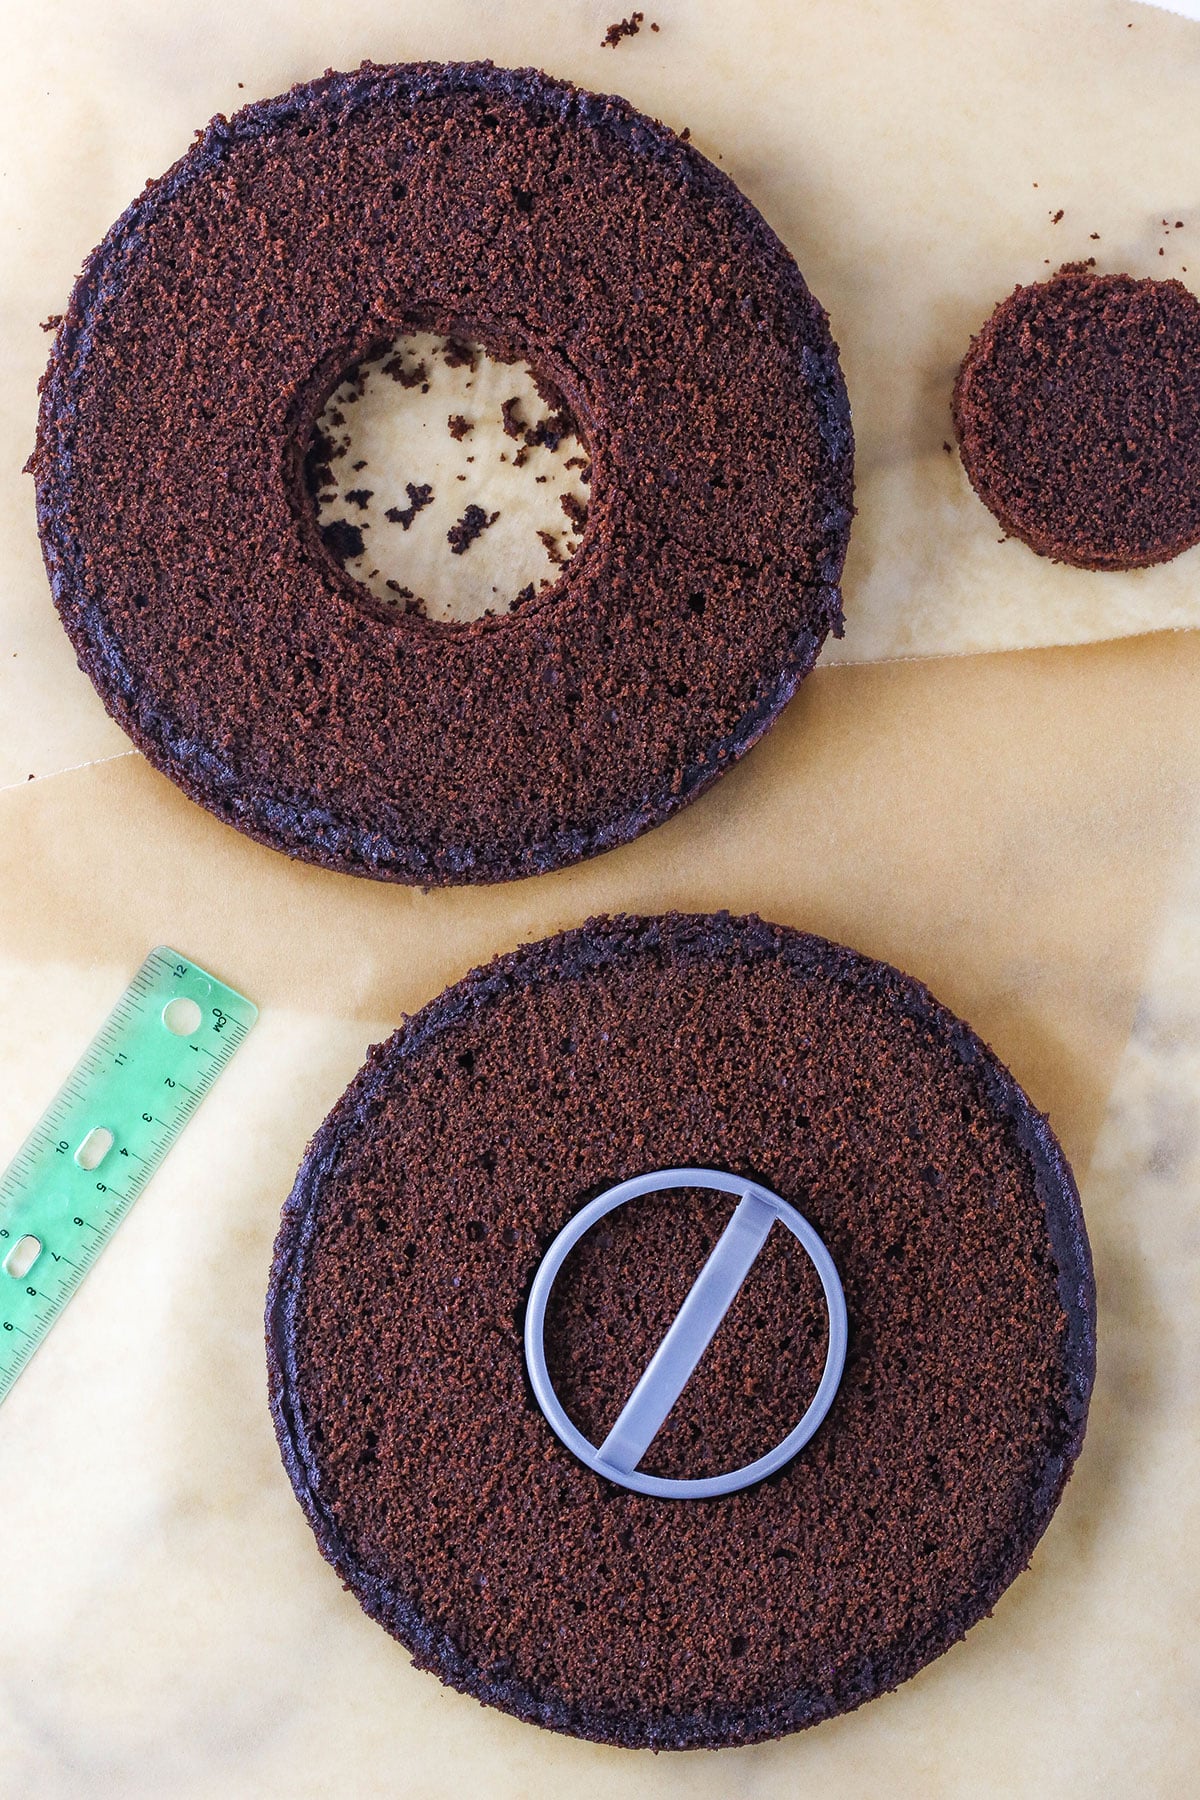 A step in making a Resurrection Cake showing removing the center of the chocolate cake using a biscuit cutter